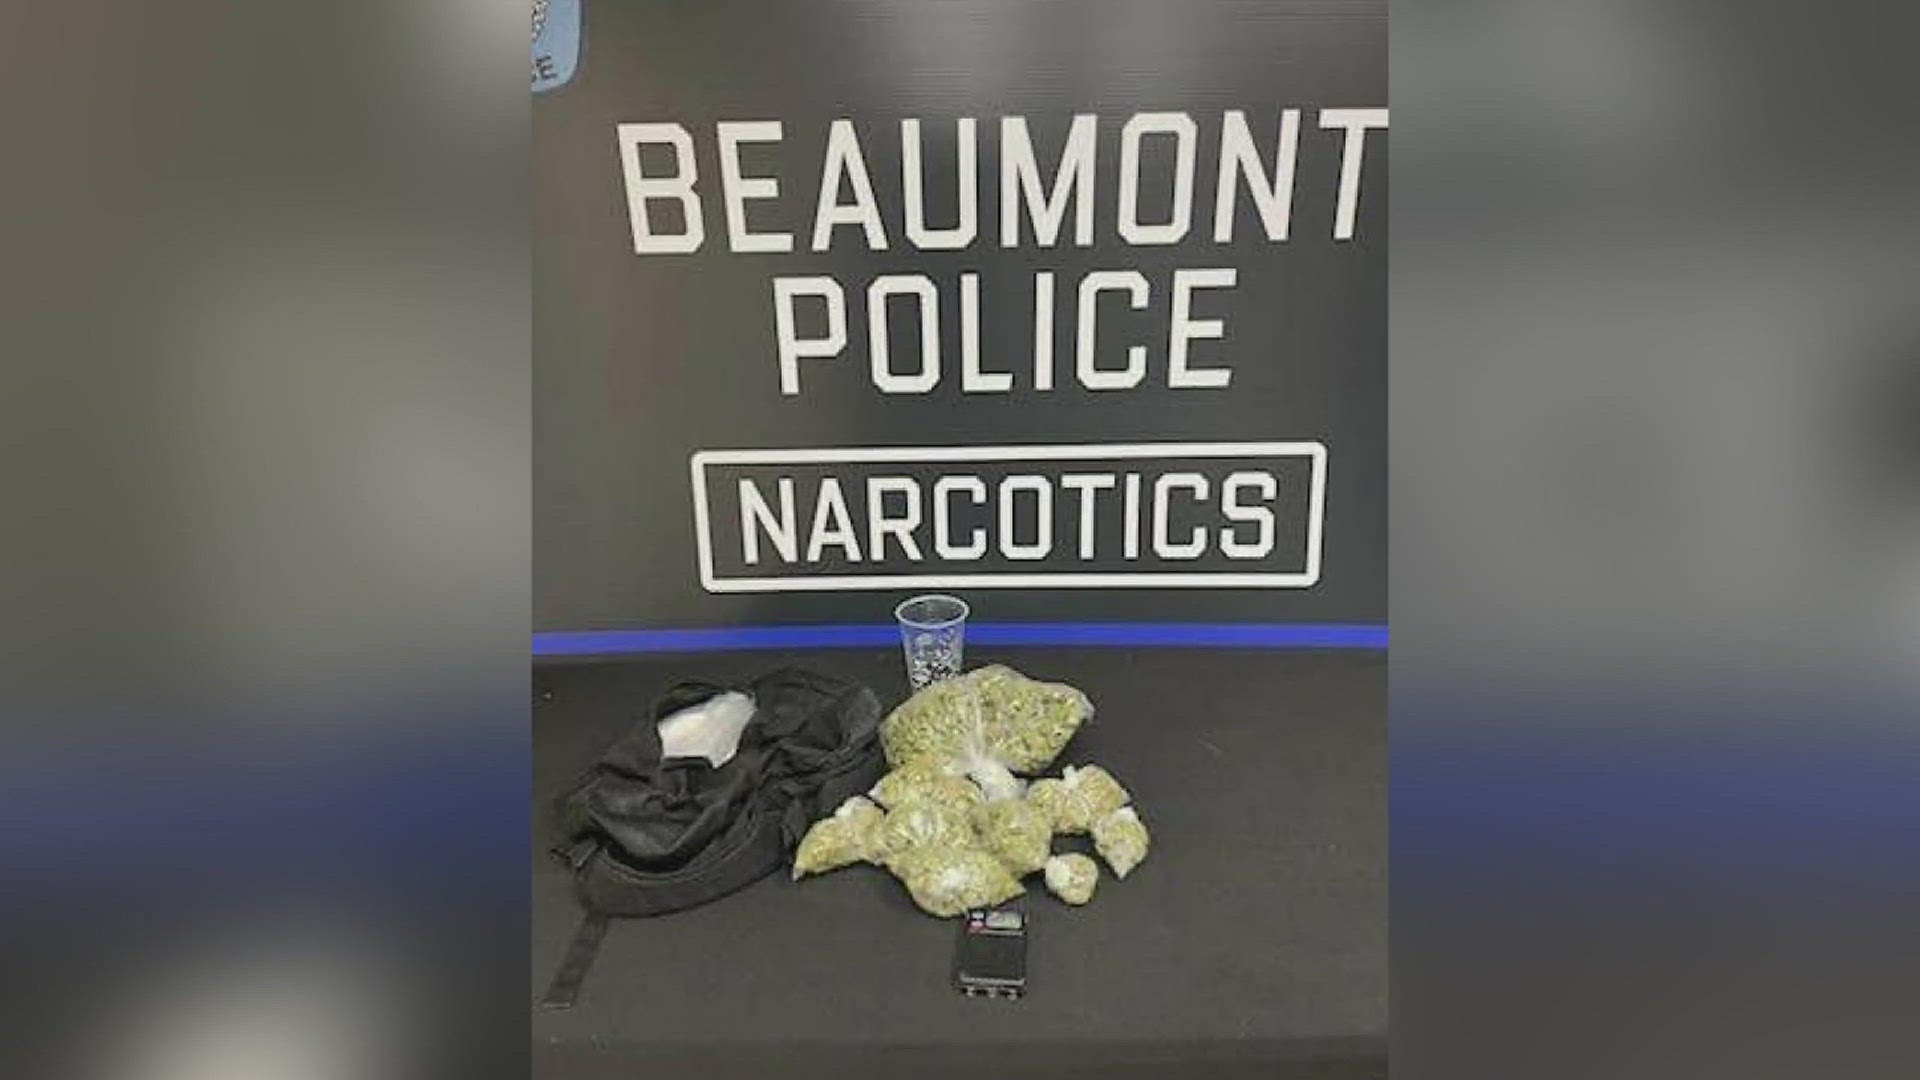 The operation, which lasted four days, was a collaborative effort between Beaumont Police and Jefferson County deputies.